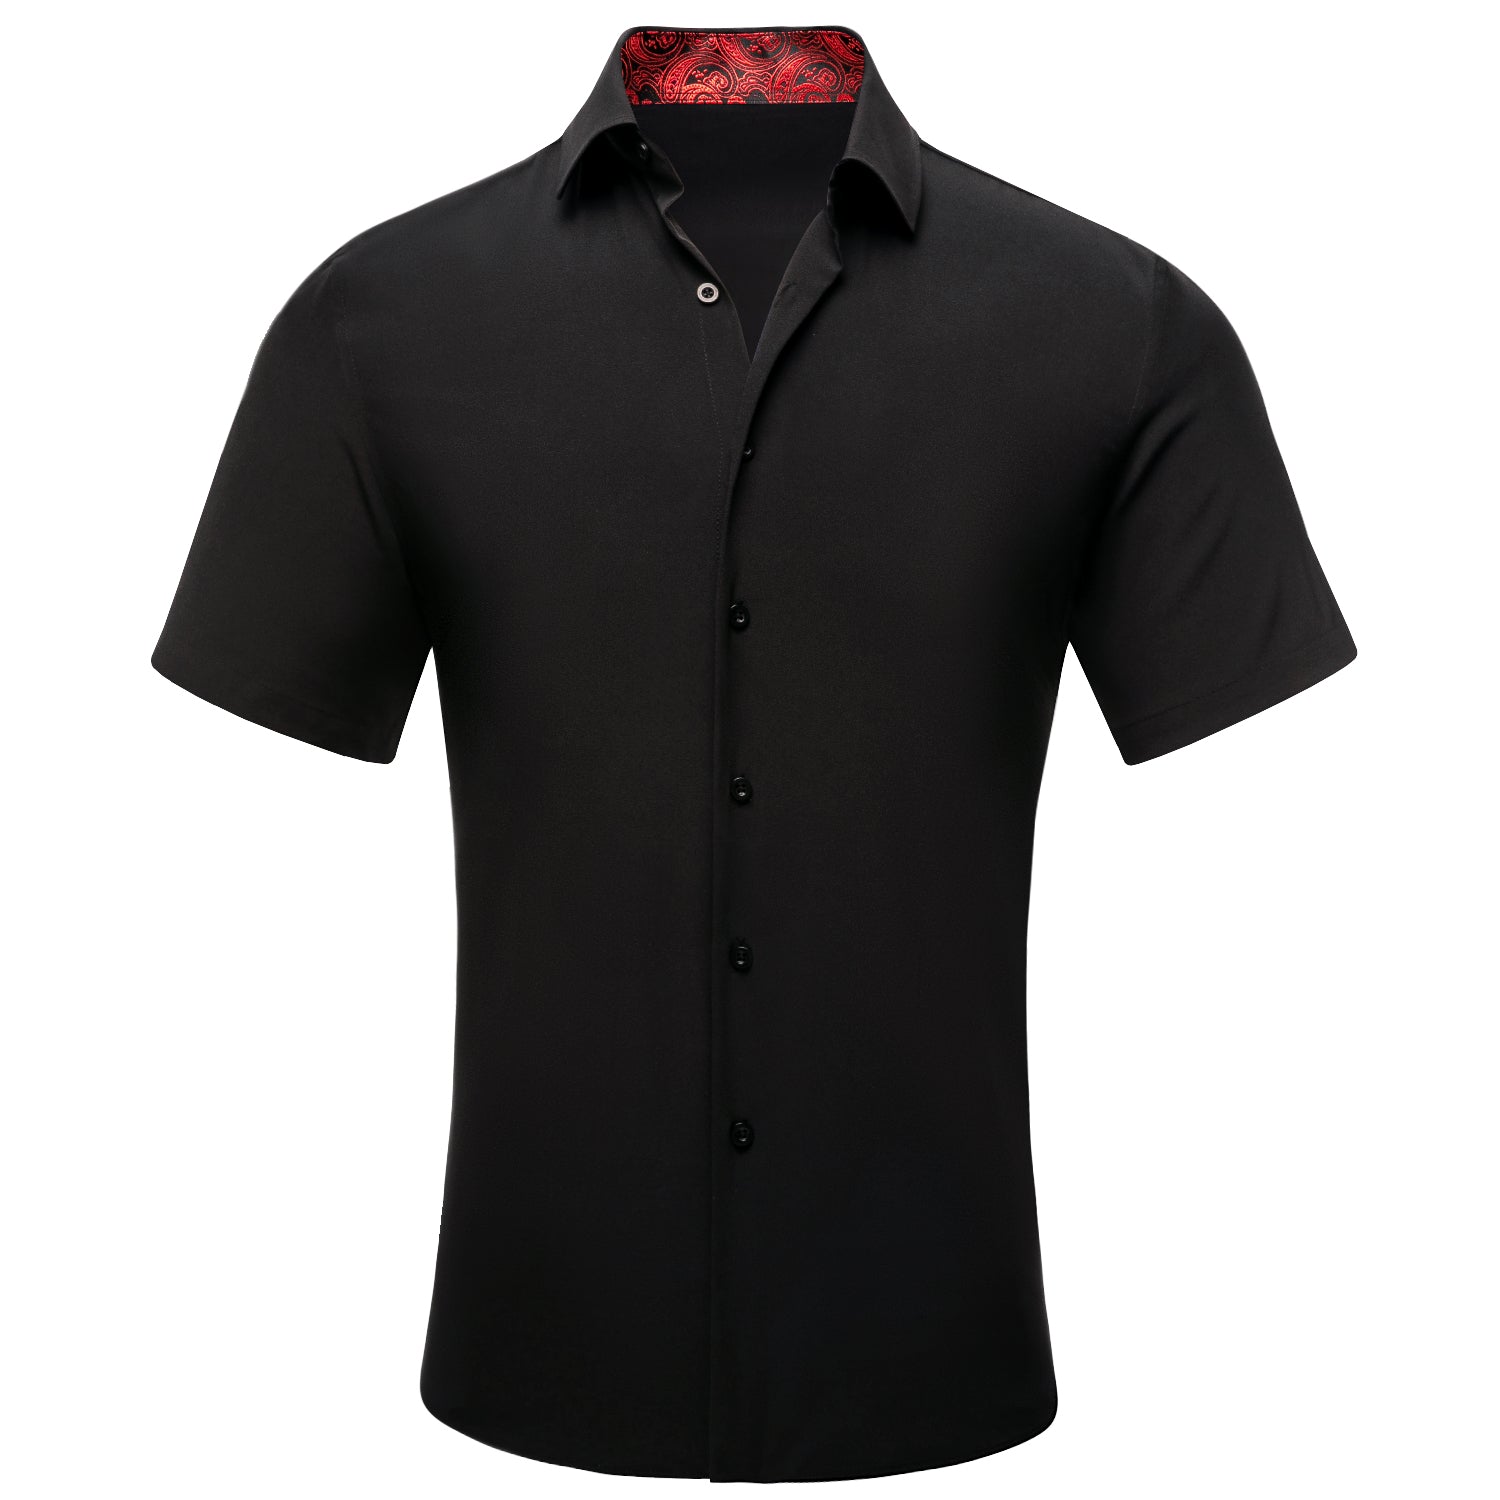 Black Solid with Red Paisley Collar Silk Men's Short Sleeve Shirt